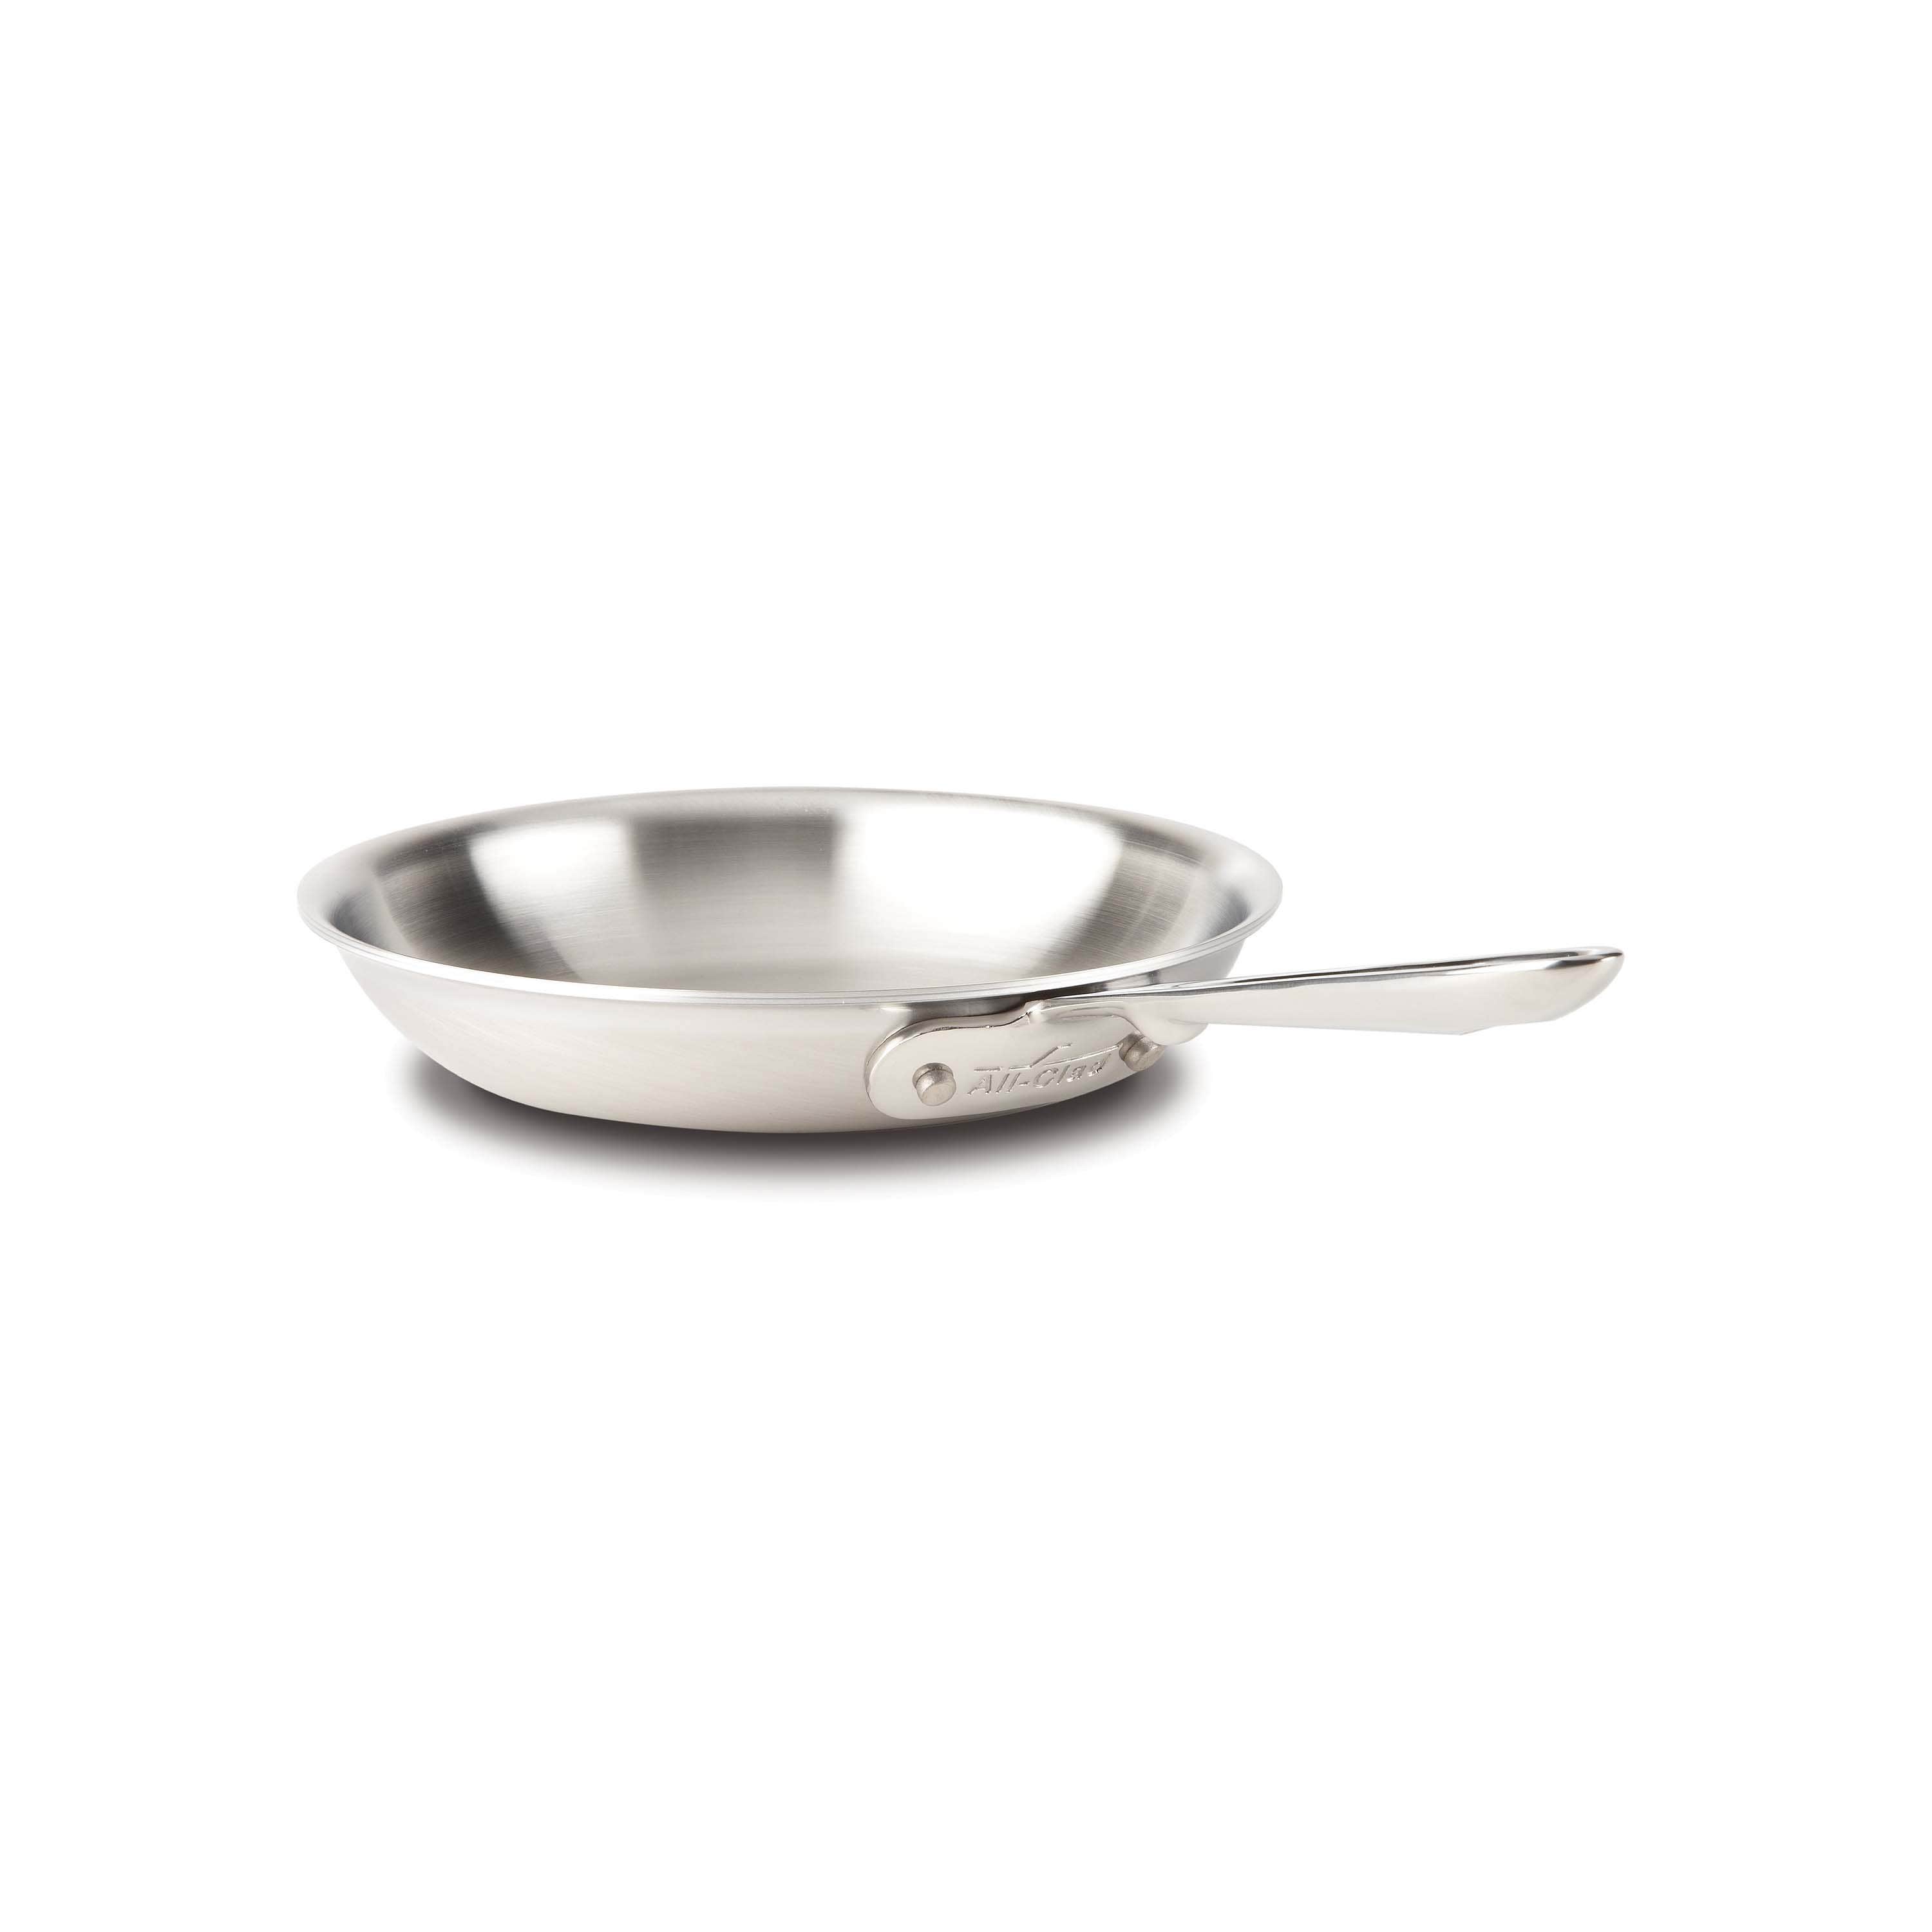 8"-9"-10" 11" Fry Pan All-Clad D5 Stainless Steel 5-Ply-Fry Pans,Your Choice 